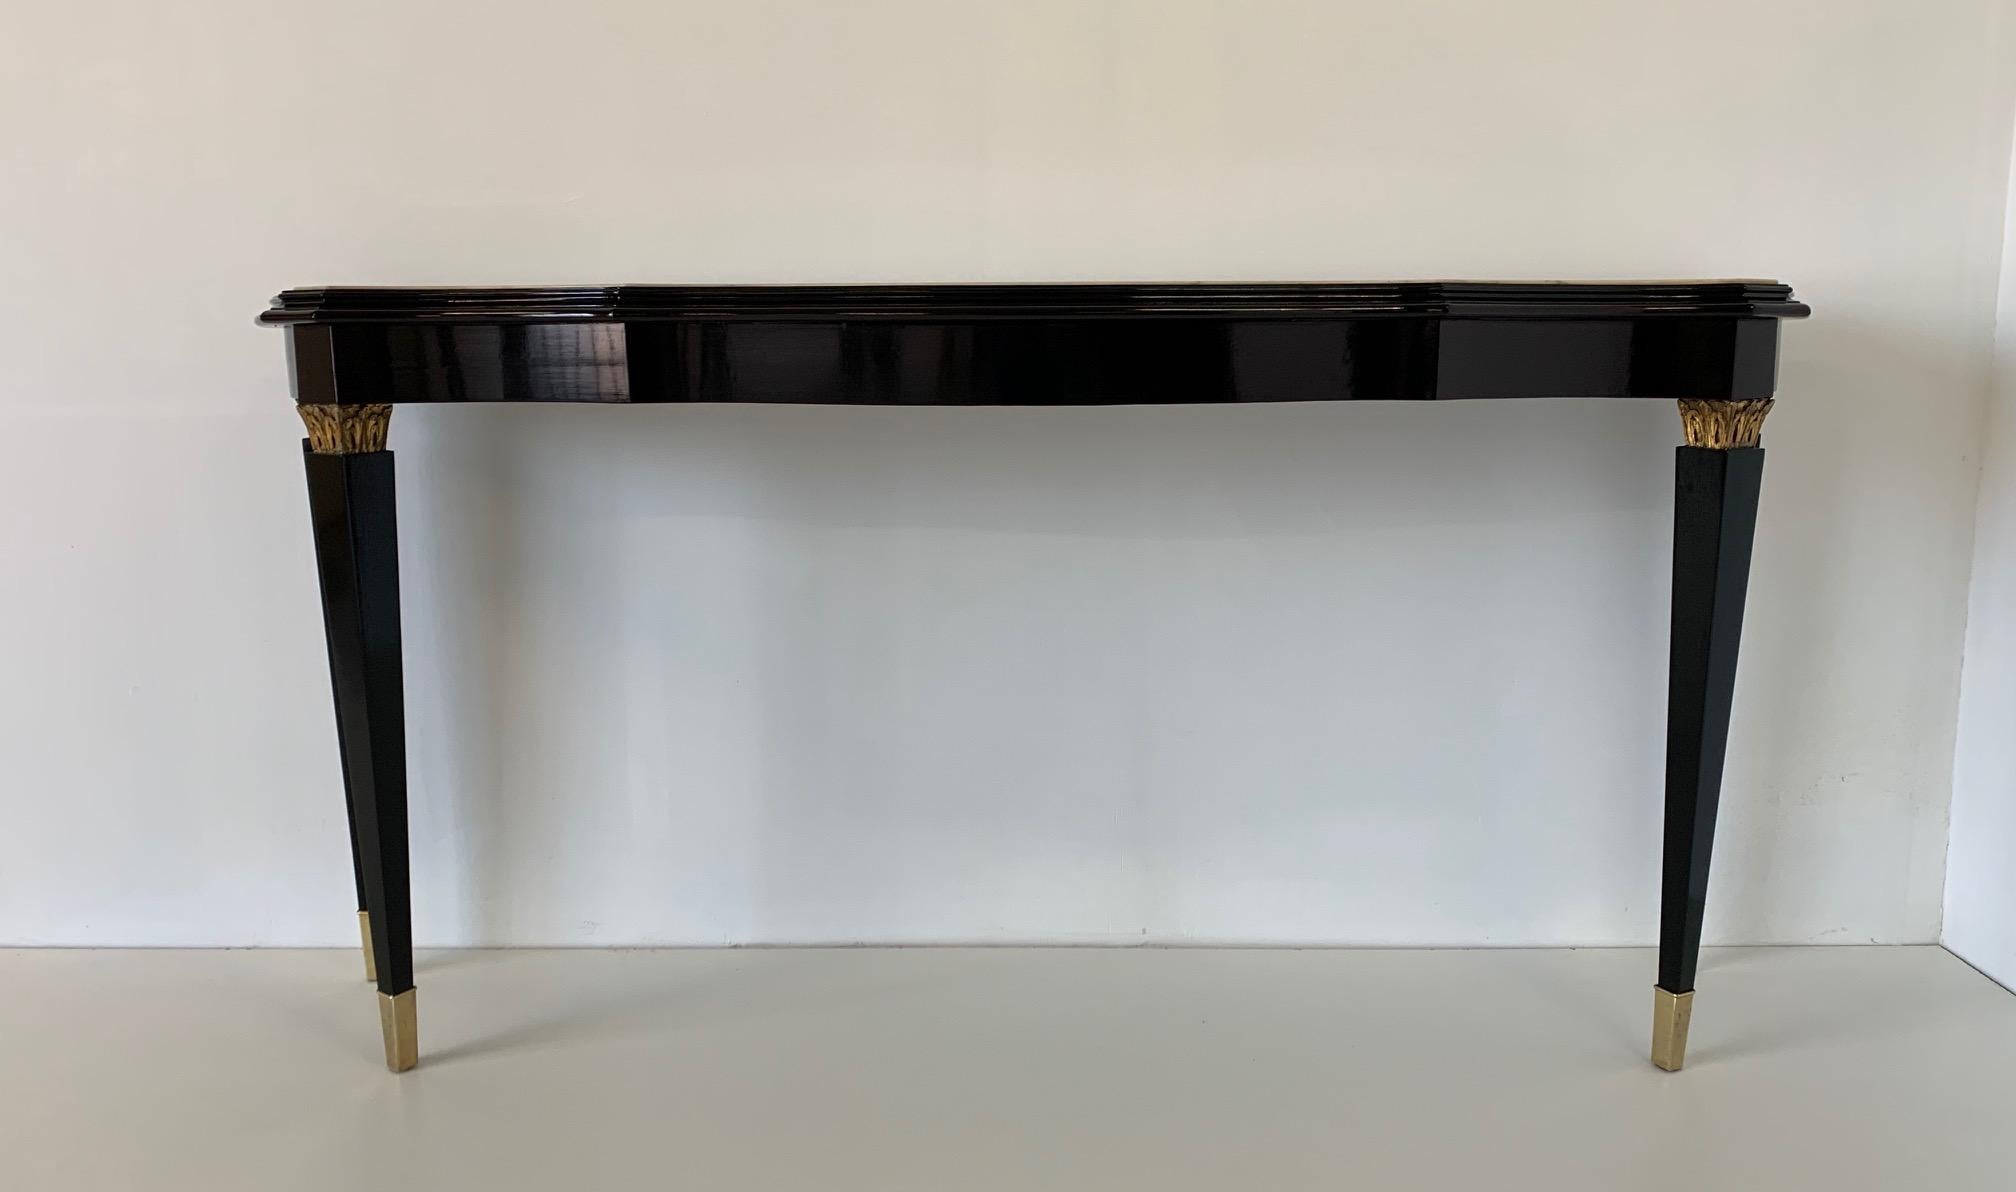 An Italian 20th century ebonized console table in the style of Paolo Buffa with brass tips and carved decorations in gold leaf.
Marble top.
Completely restored.